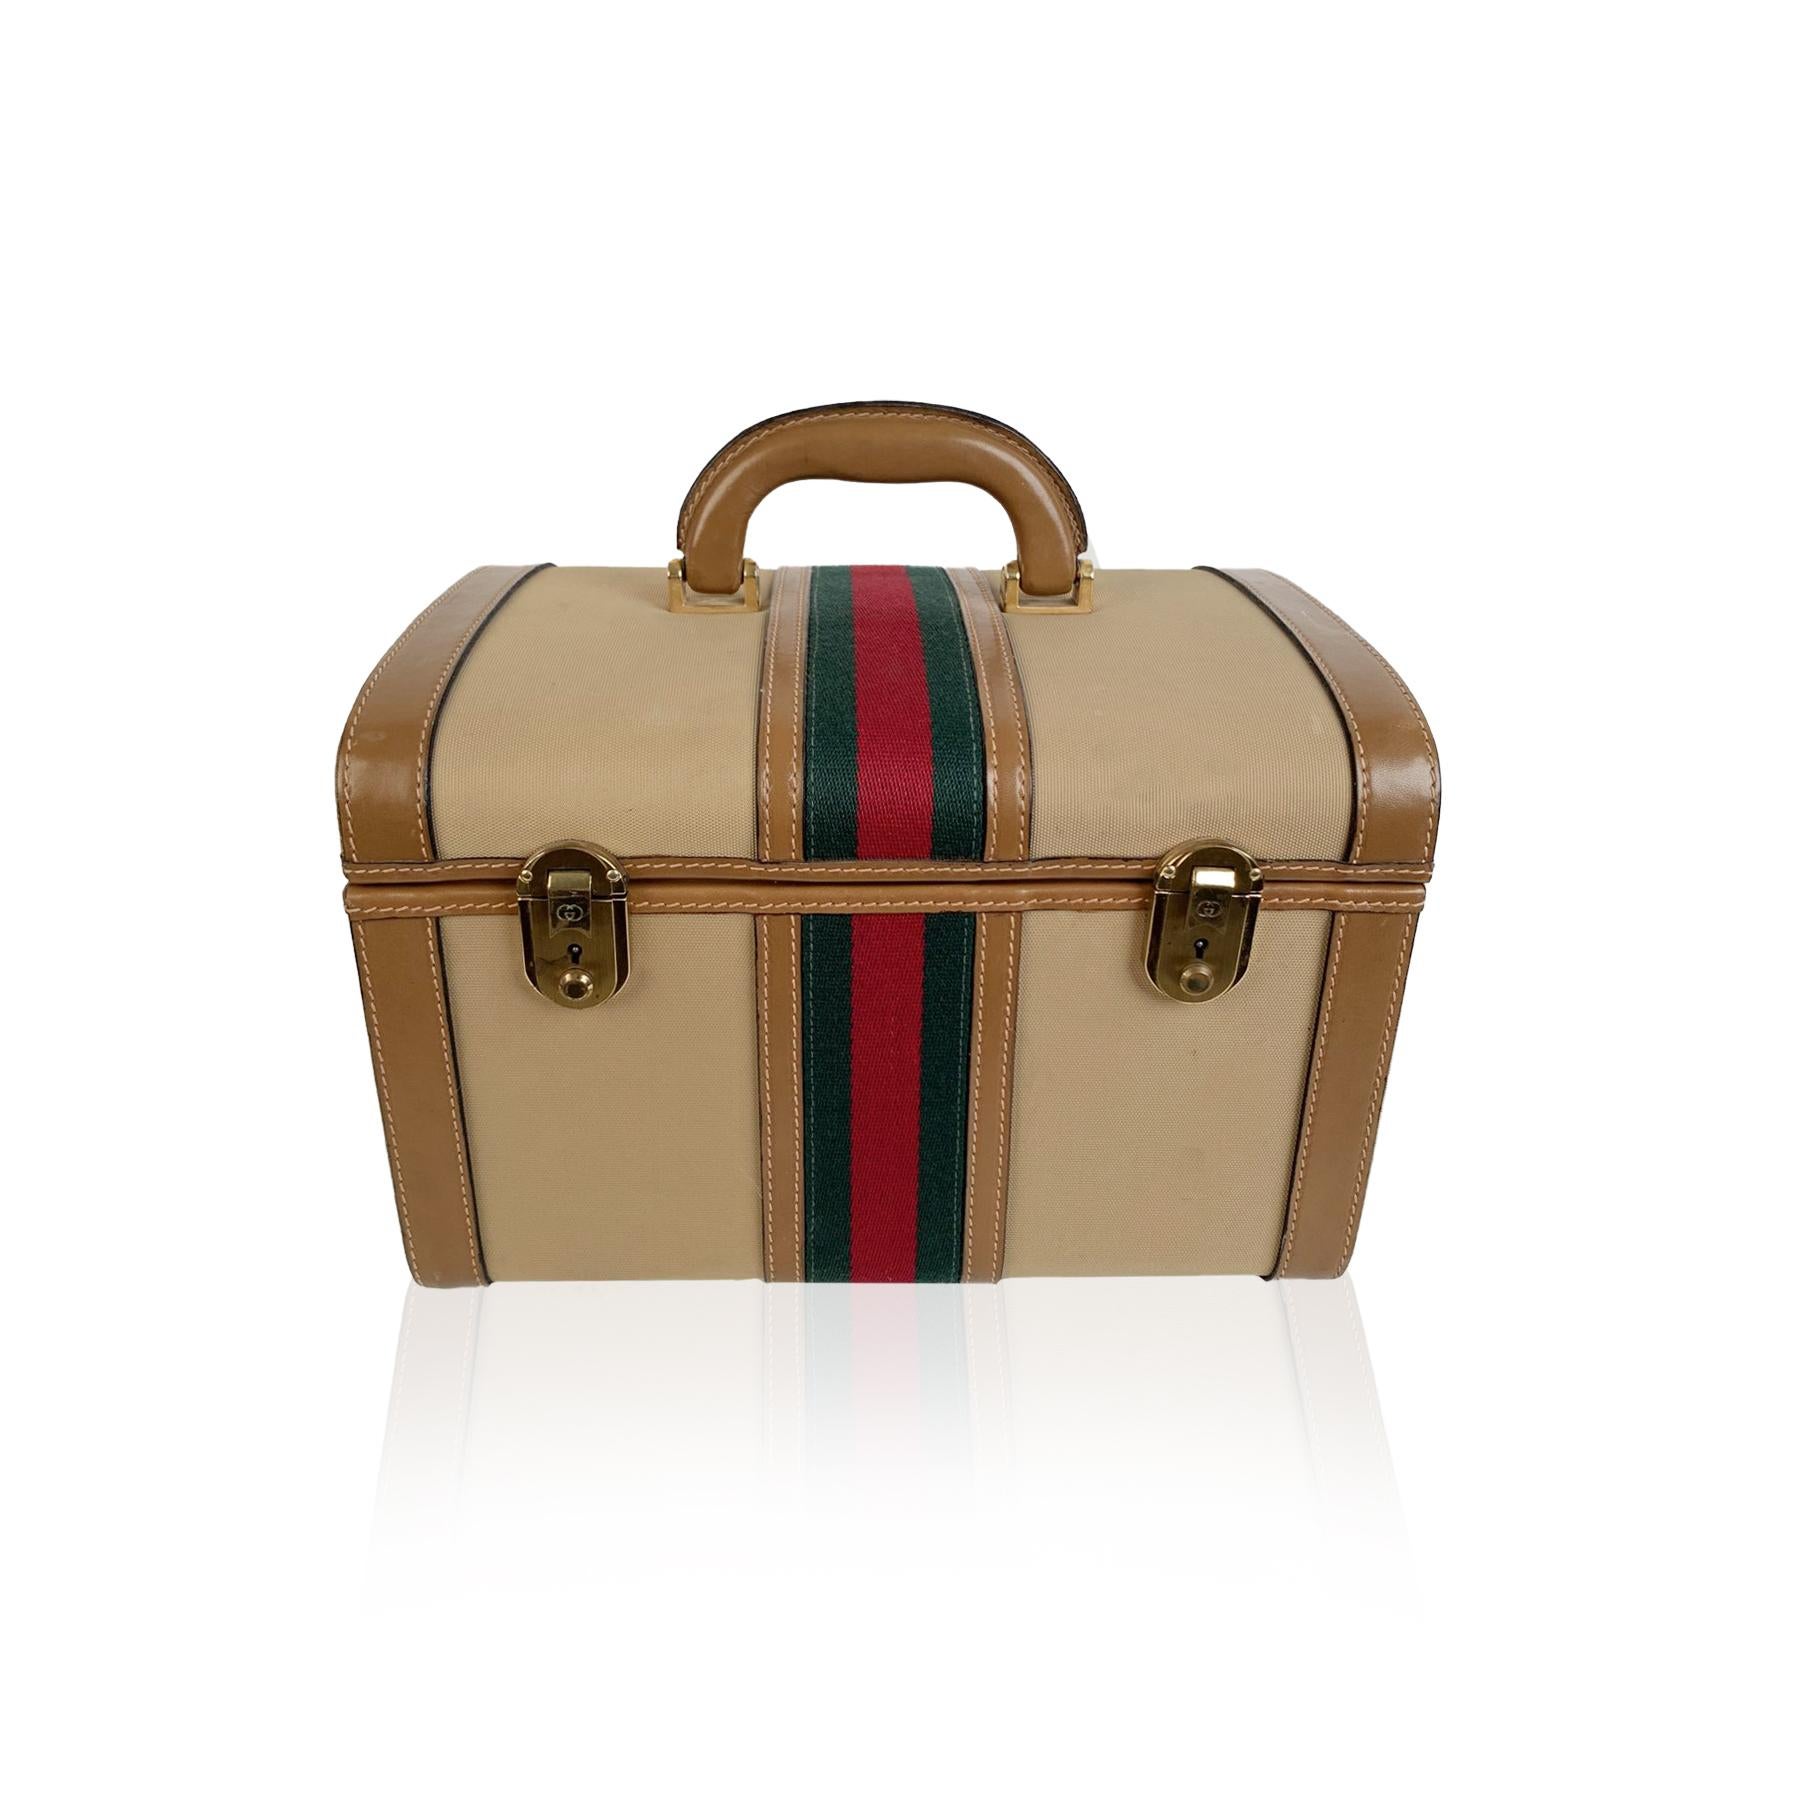 Splendid vintage train case by GUCCI, from the early 1970s. Crafted in beige canvas with tan genuine leather trim and handle. It features green/red/green striped detailing and gold-tone metal hardware. Double front key closure (key is included).